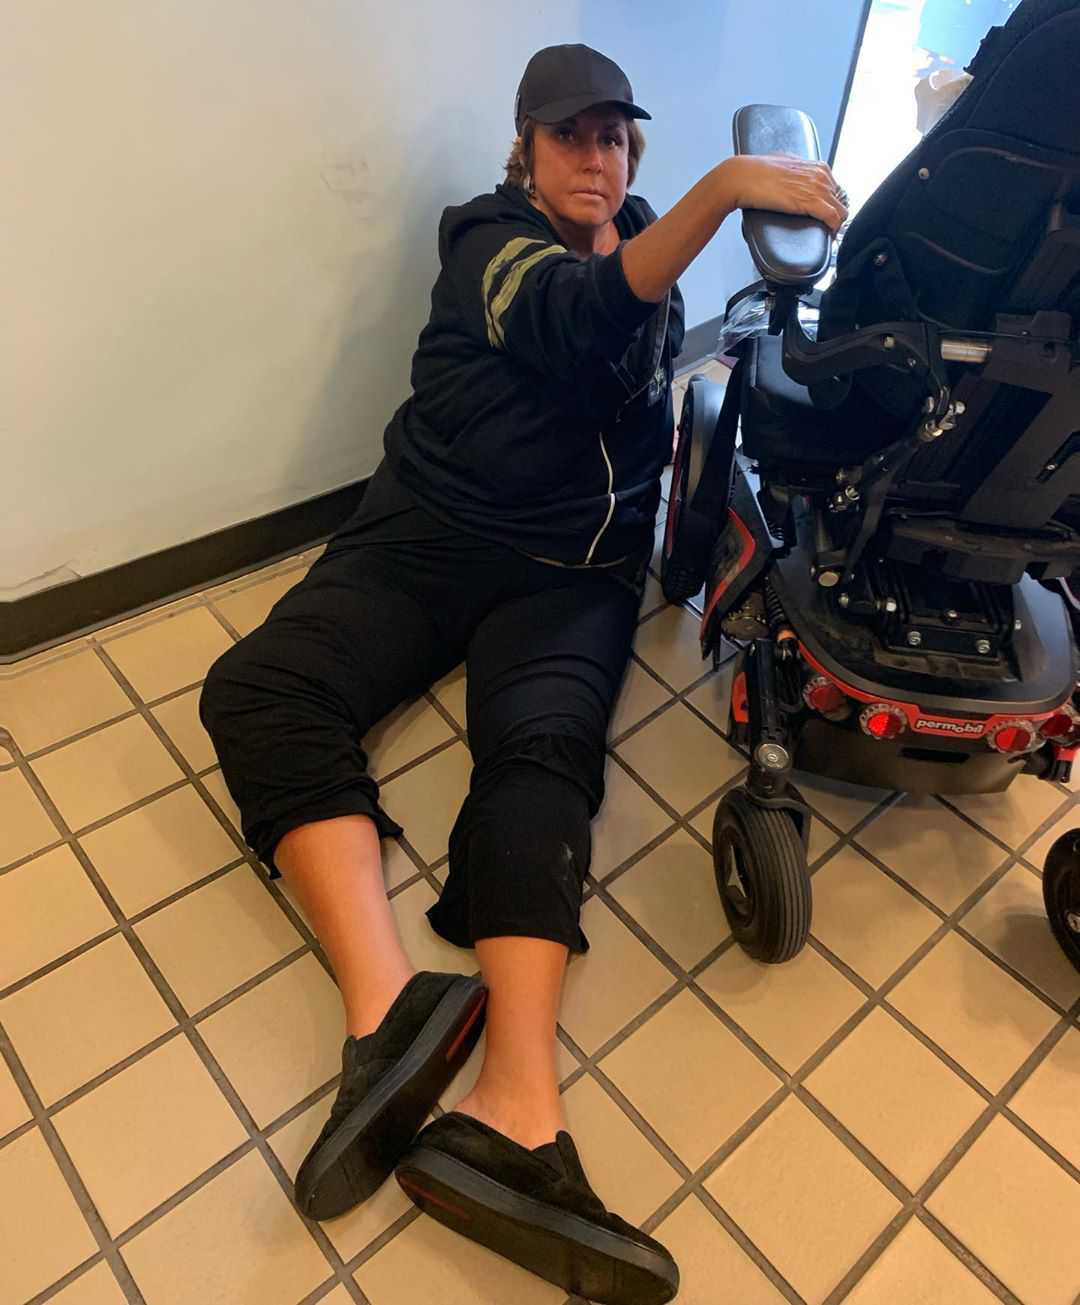 Abby Lee Miller thanks airport employees after fall